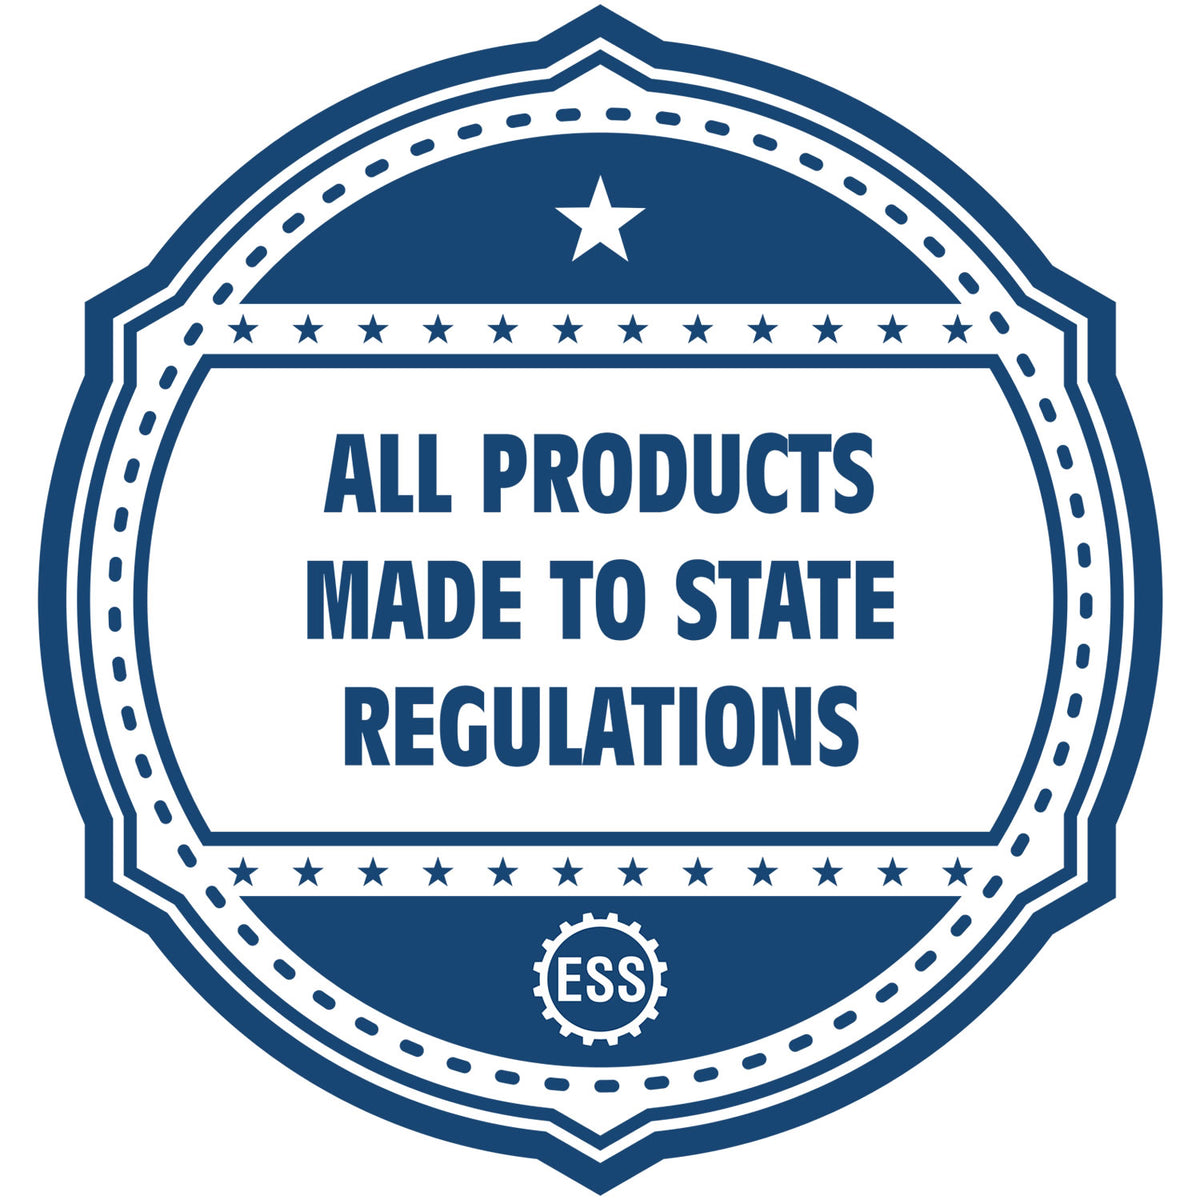 An icon or badge element for the New Mexico Landscape Architectural Seal Stamp showing that this product is made in compliance with state regulations.